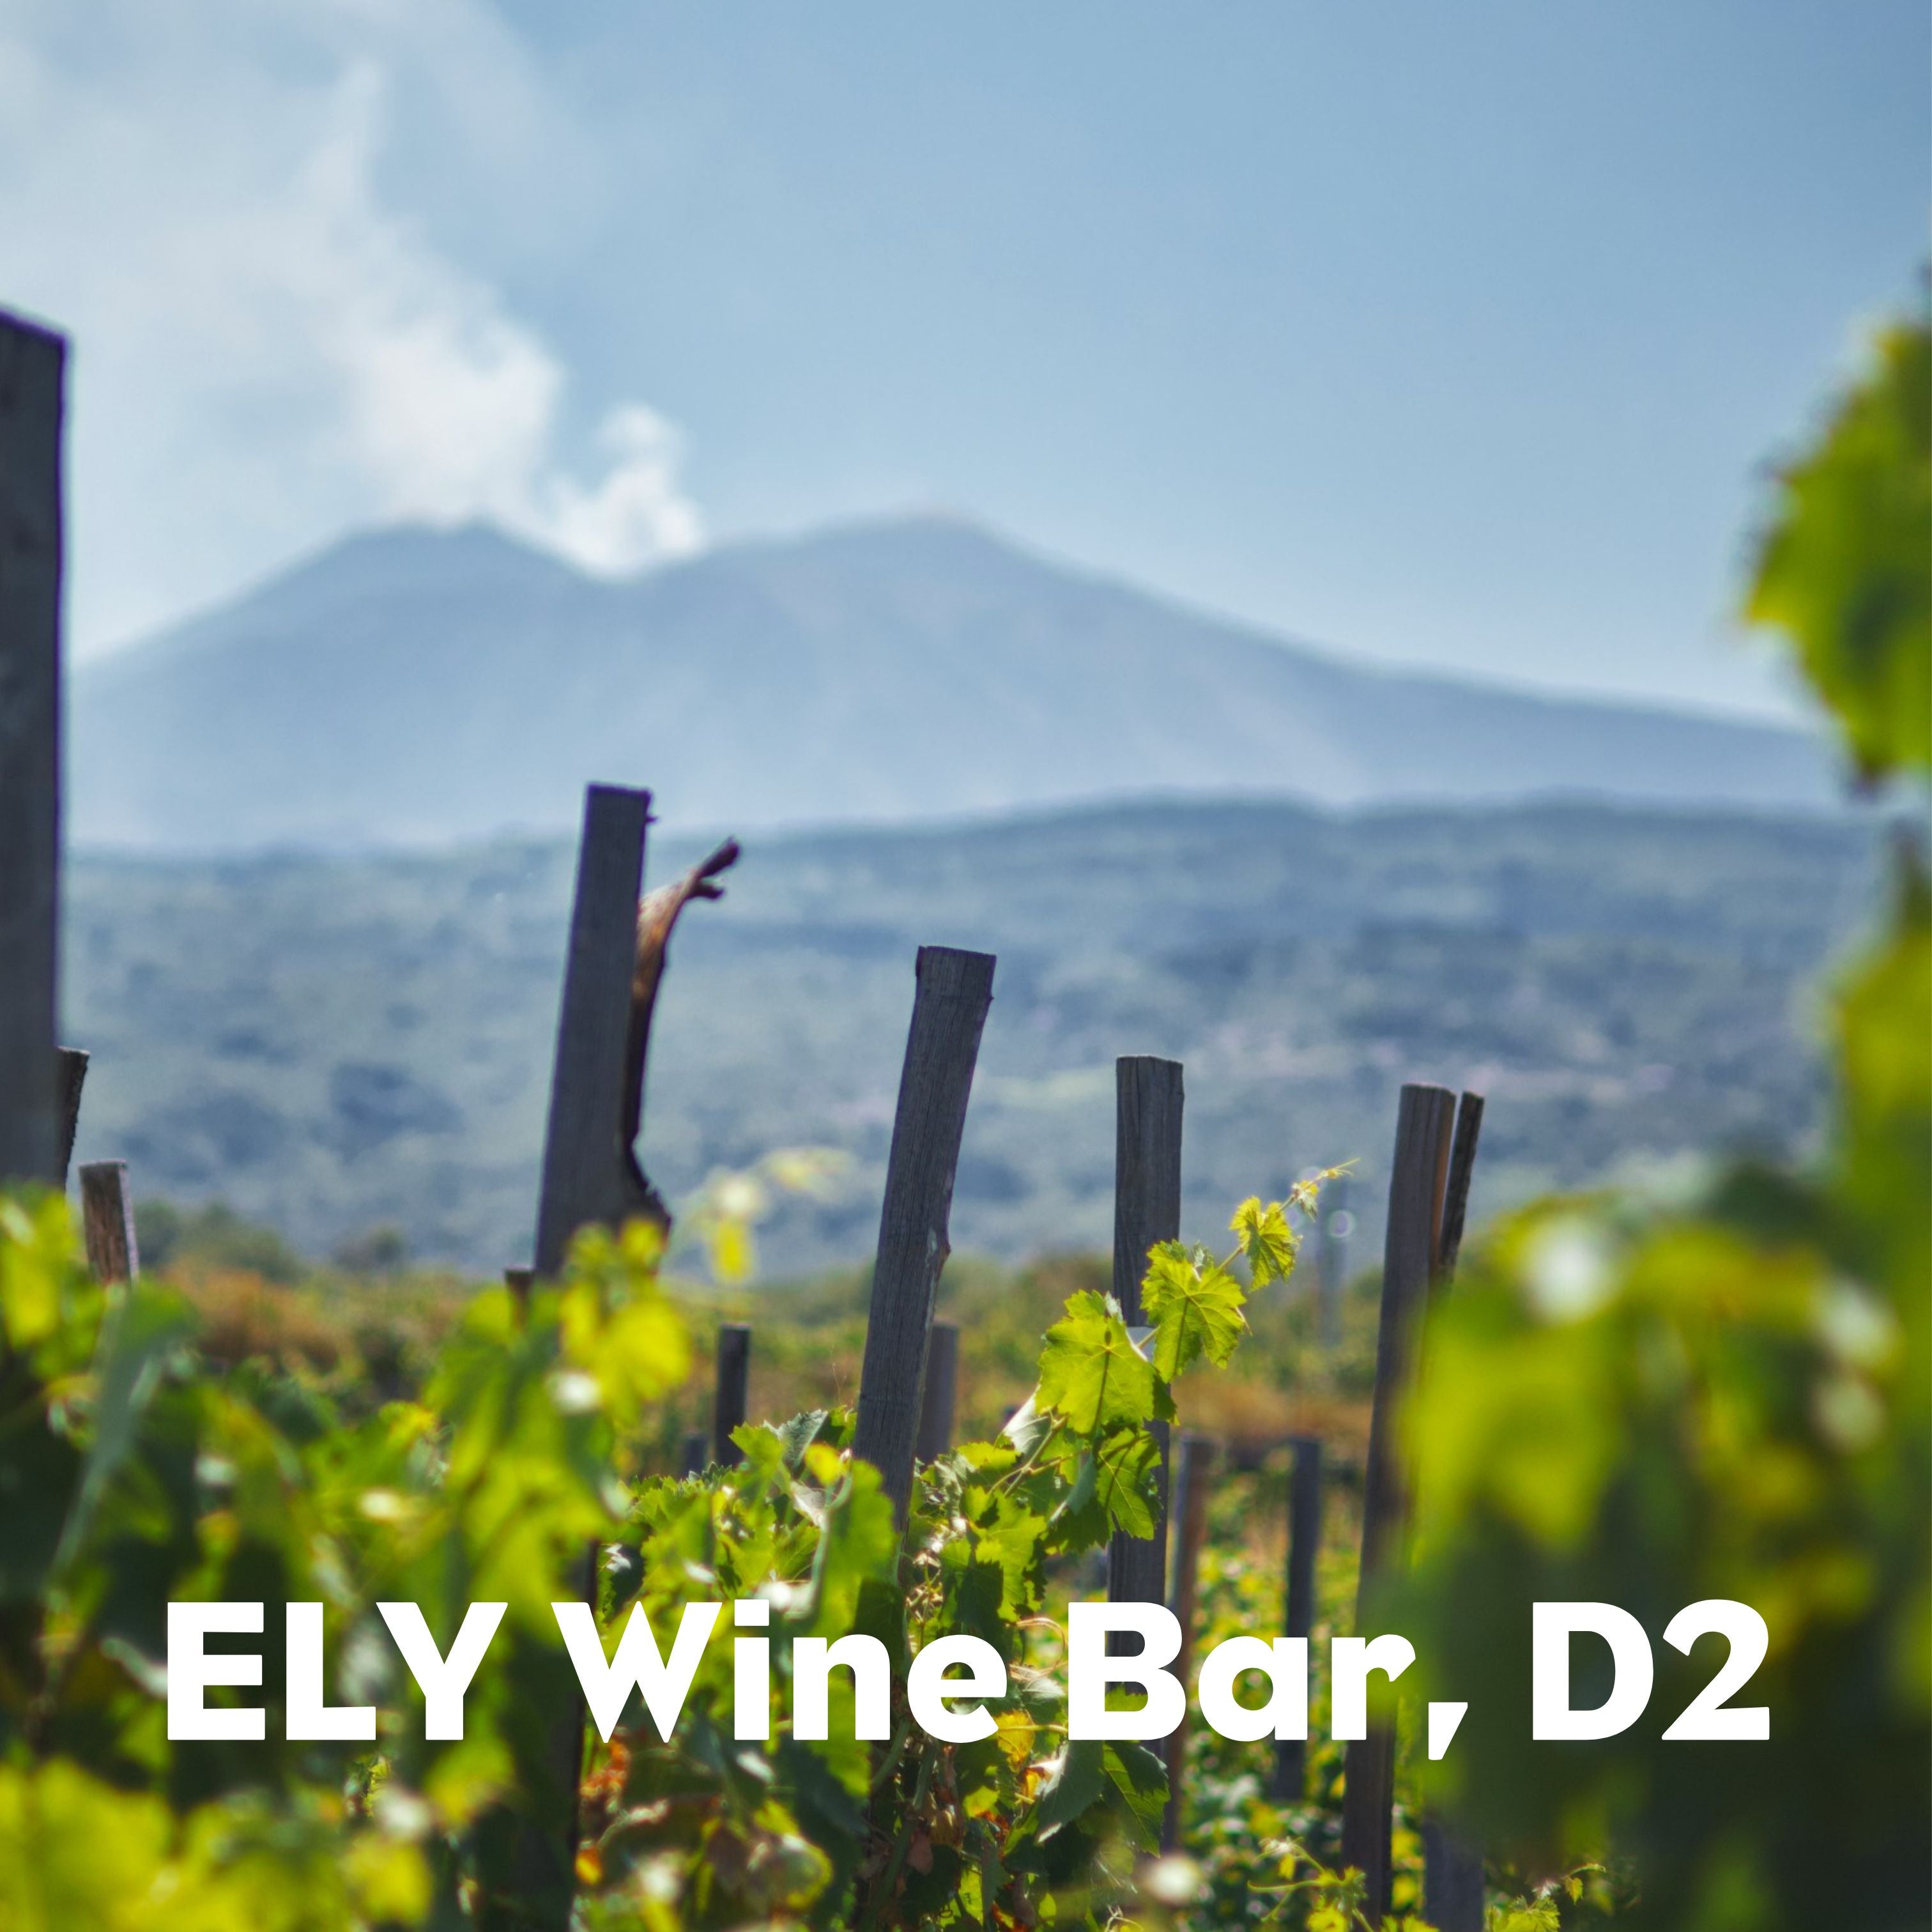 'Volcanic vineyards' some of Europe’s most interesting wines - ELY Wine bar, D2 July 18th